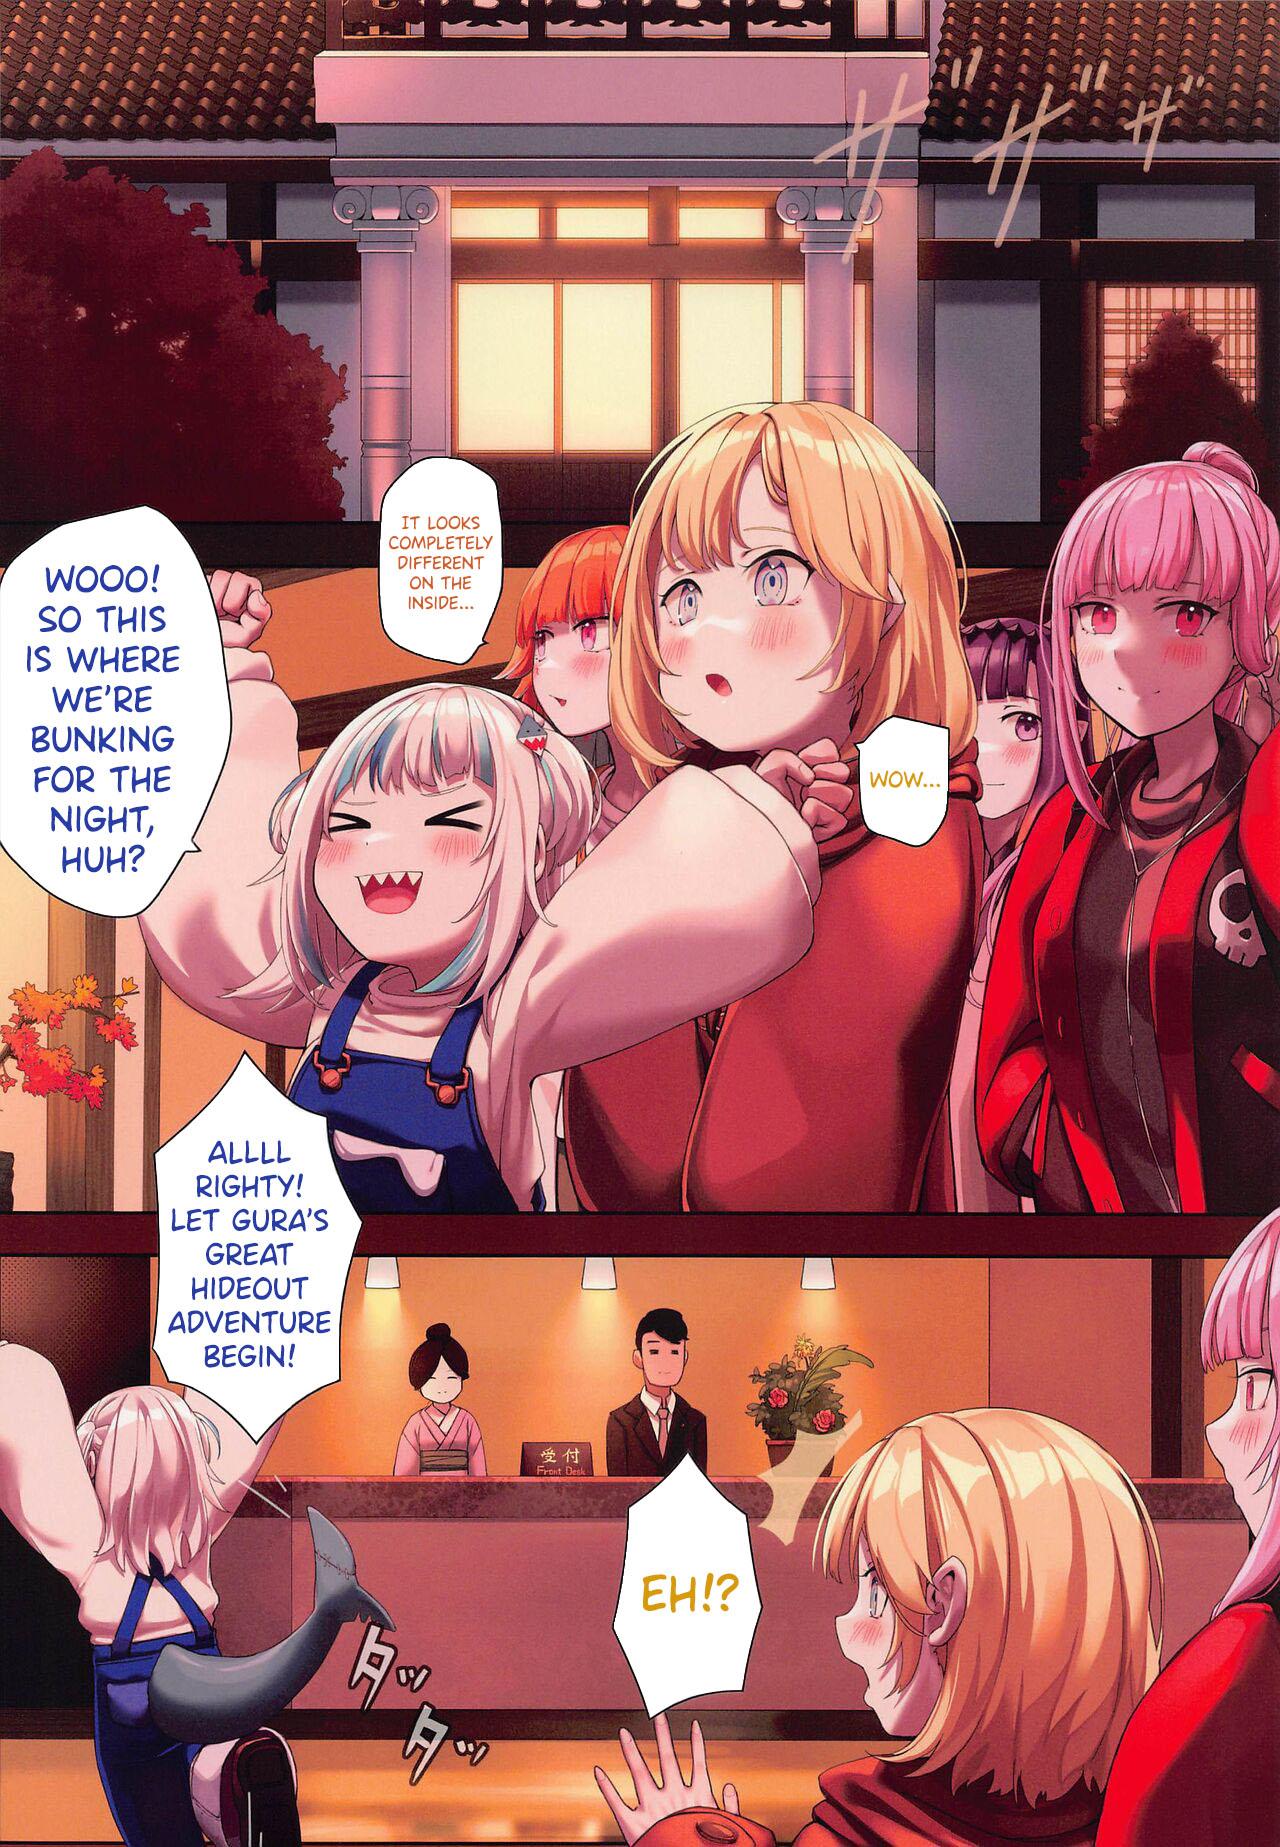 Interracial Hardcore AmeSame Onsen Ryokou no Iroiro | The Many Happenings of AmeSame's Hot Spring Trip - Hololive Fucking Sex - Page 3